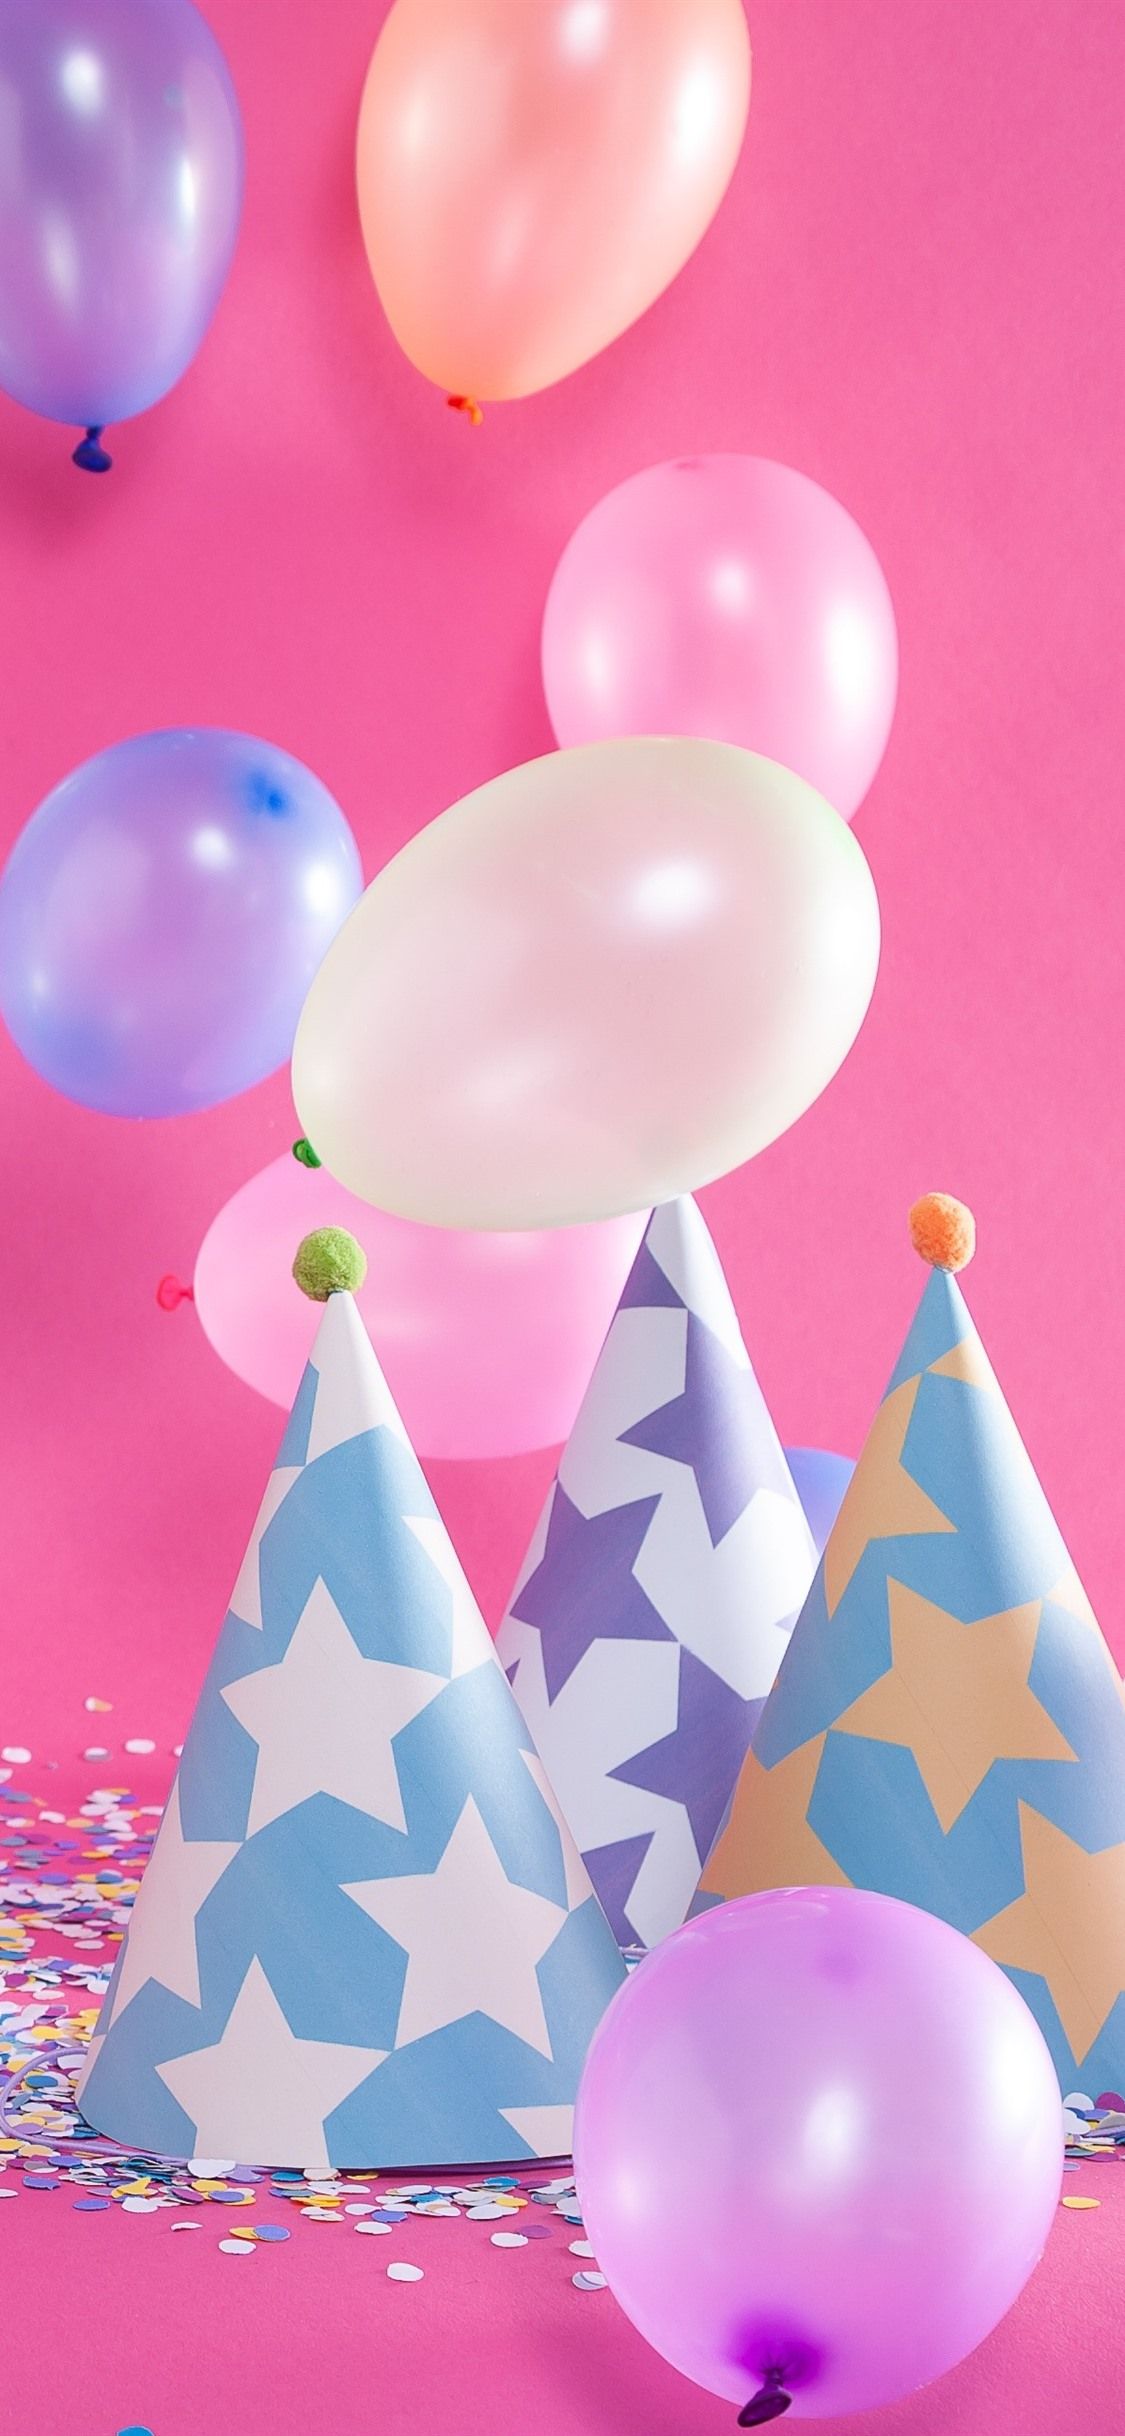 Wallpaper Some colorful balloons, hat, decoration, Birthday 3840x2160 UHD 4K Picture, Image